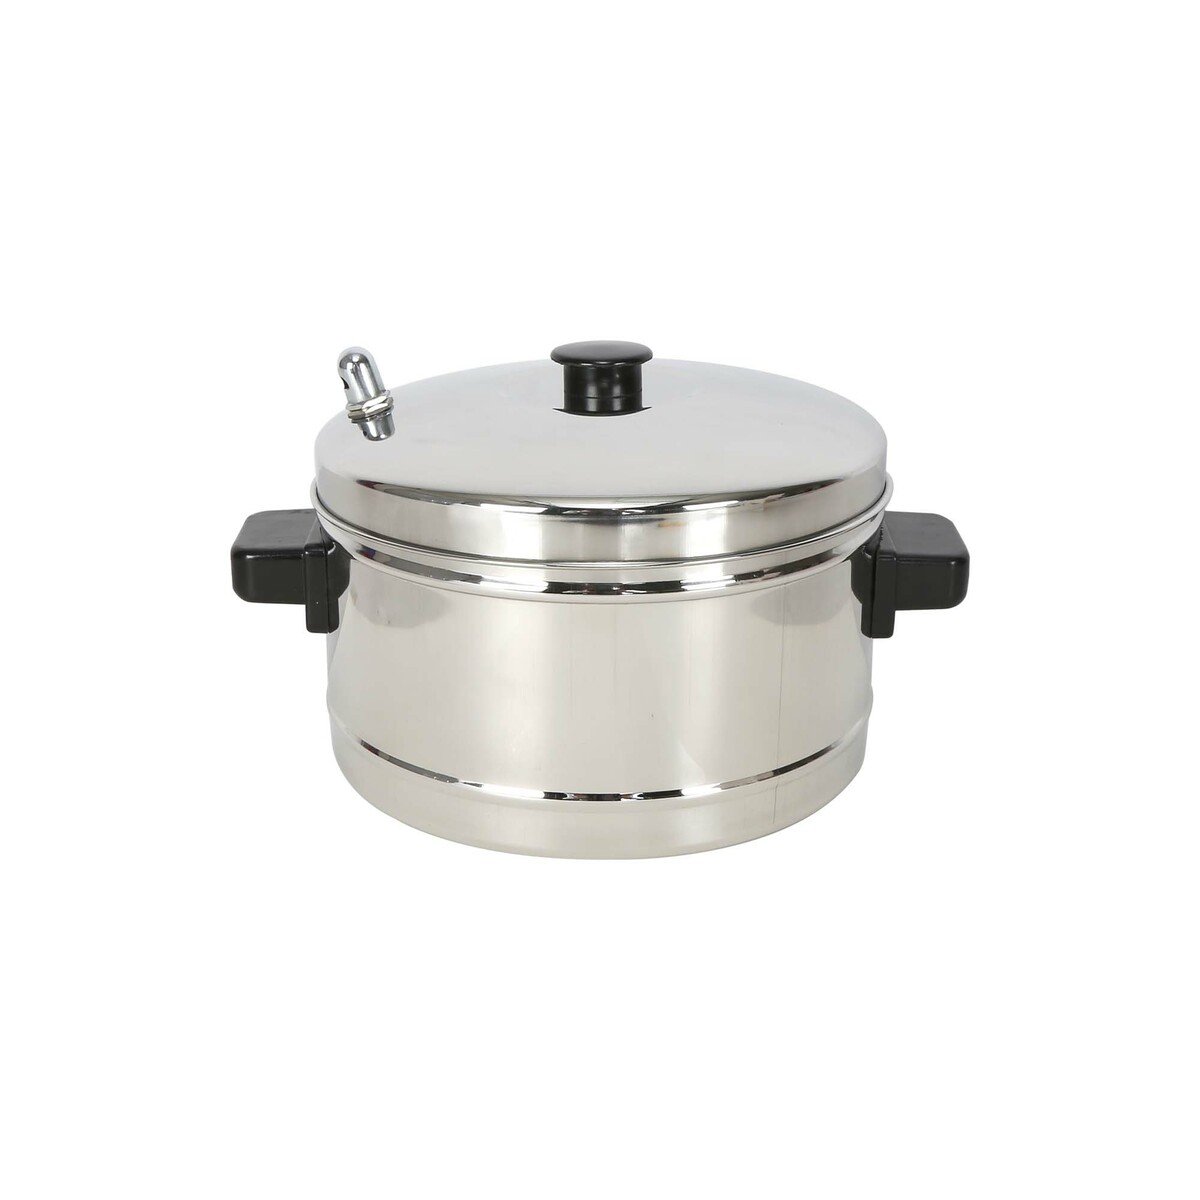 Chefline Stainless Steel Idly Pot + Stand 4Plates/Idly Cooker IND